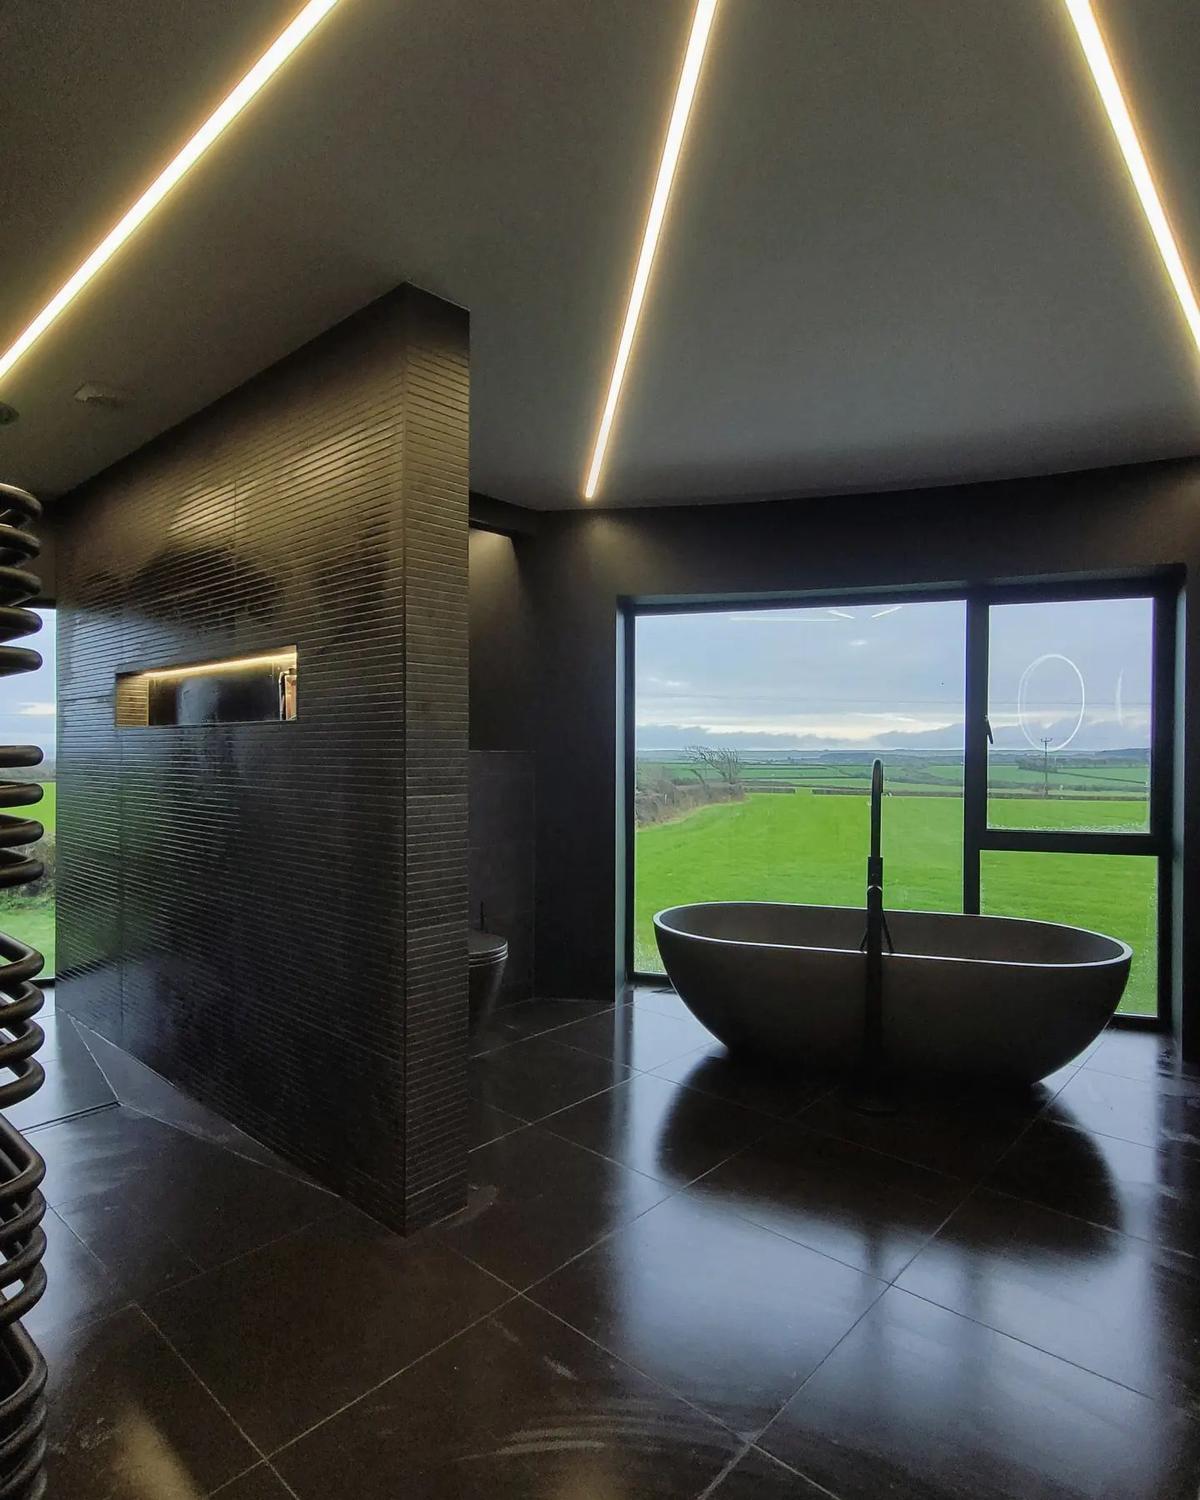 The master en suite (Courtesy of <a href="https://www.instagram.com/water_tower_conversion/">Rob Hunt</a>)